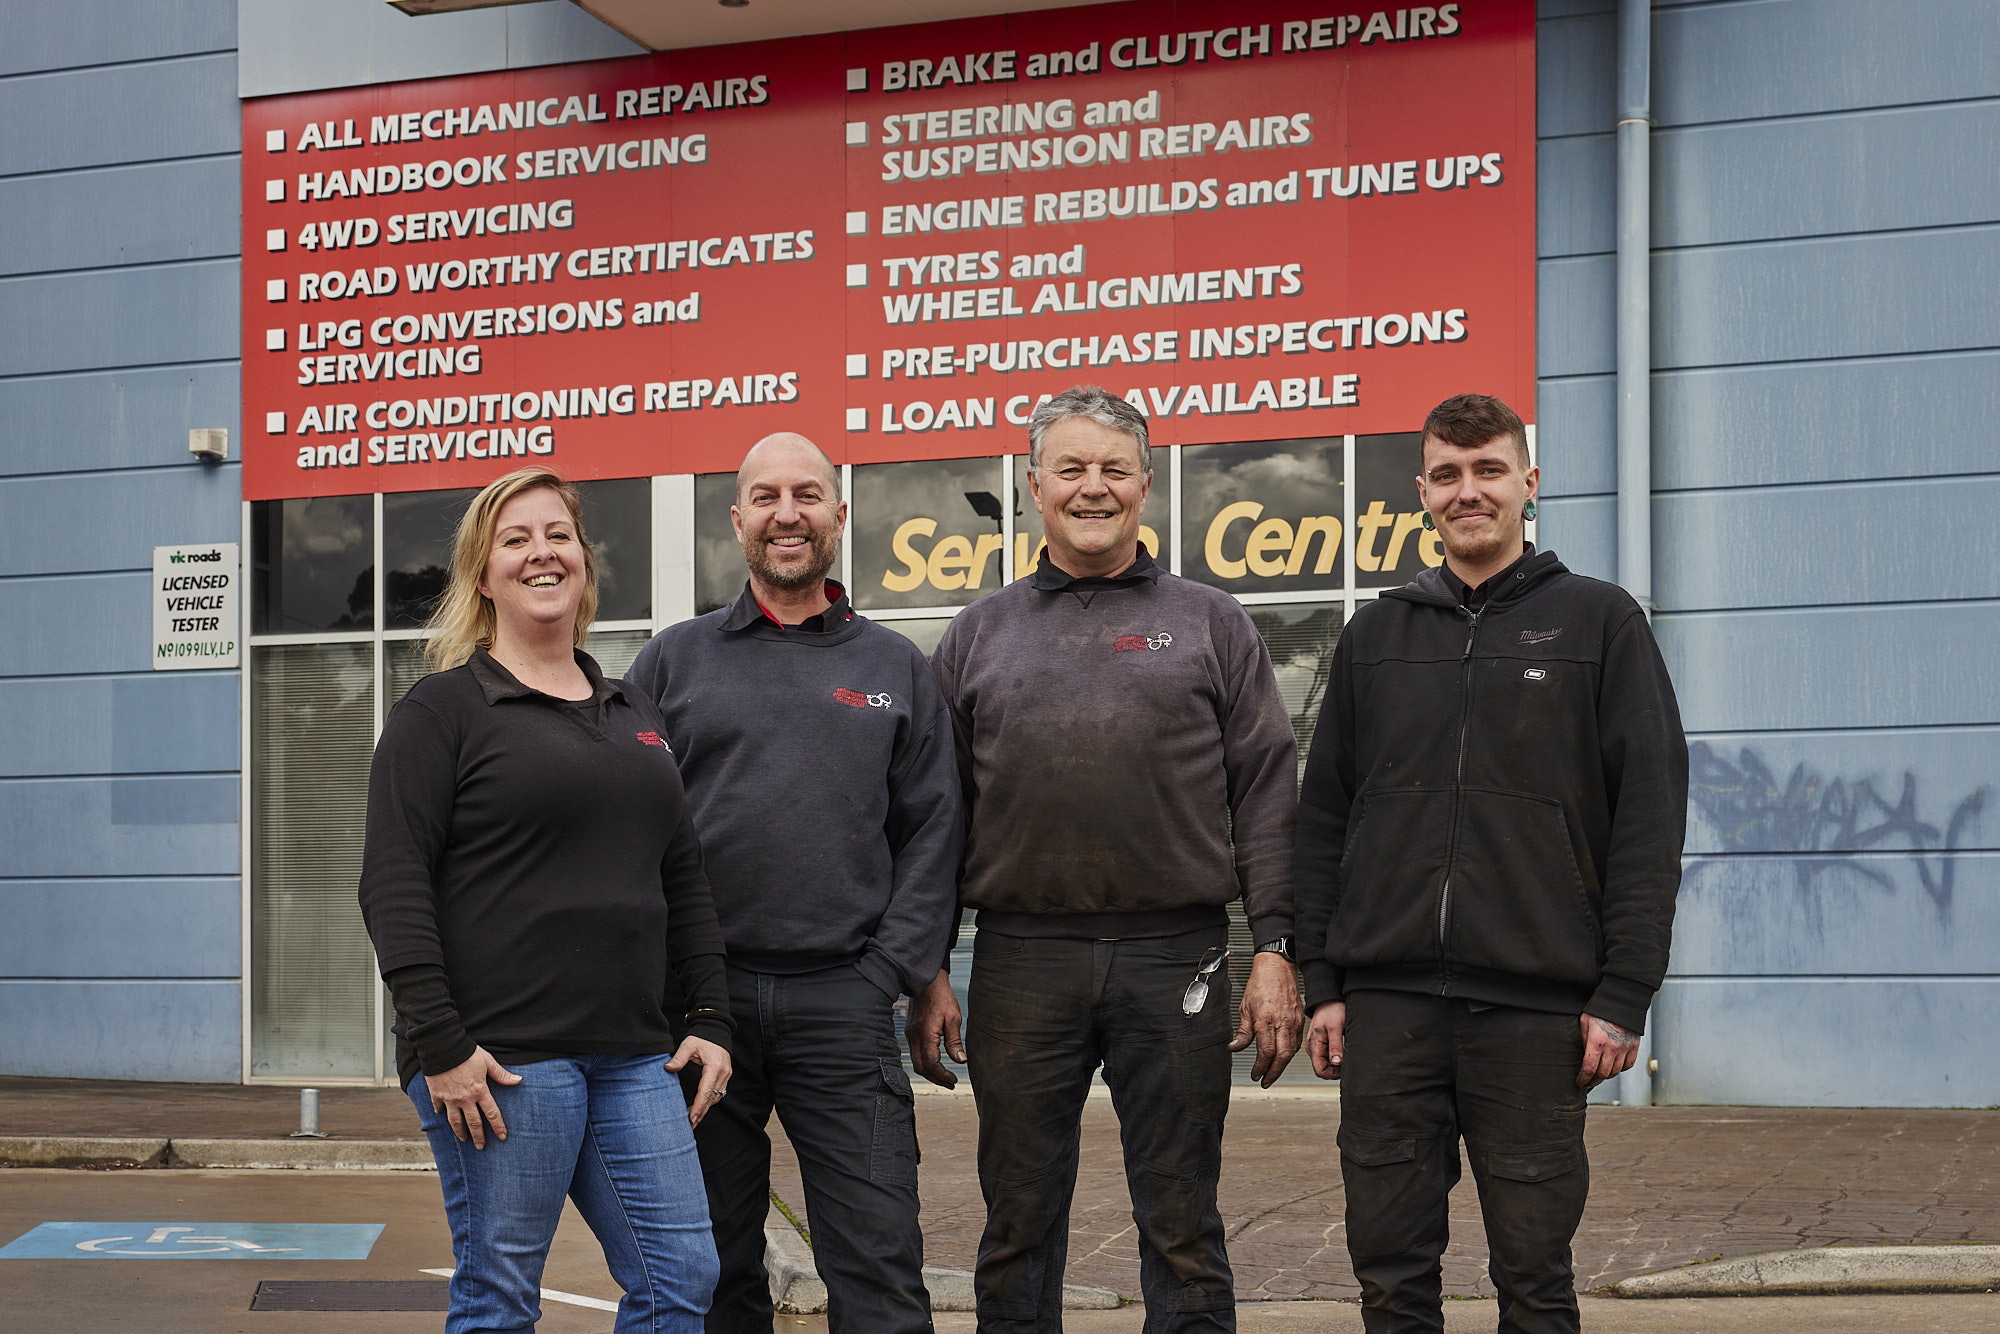 His'n'Hers Automotive Solutions Team standing in front of the workshop building and smiling to the camera